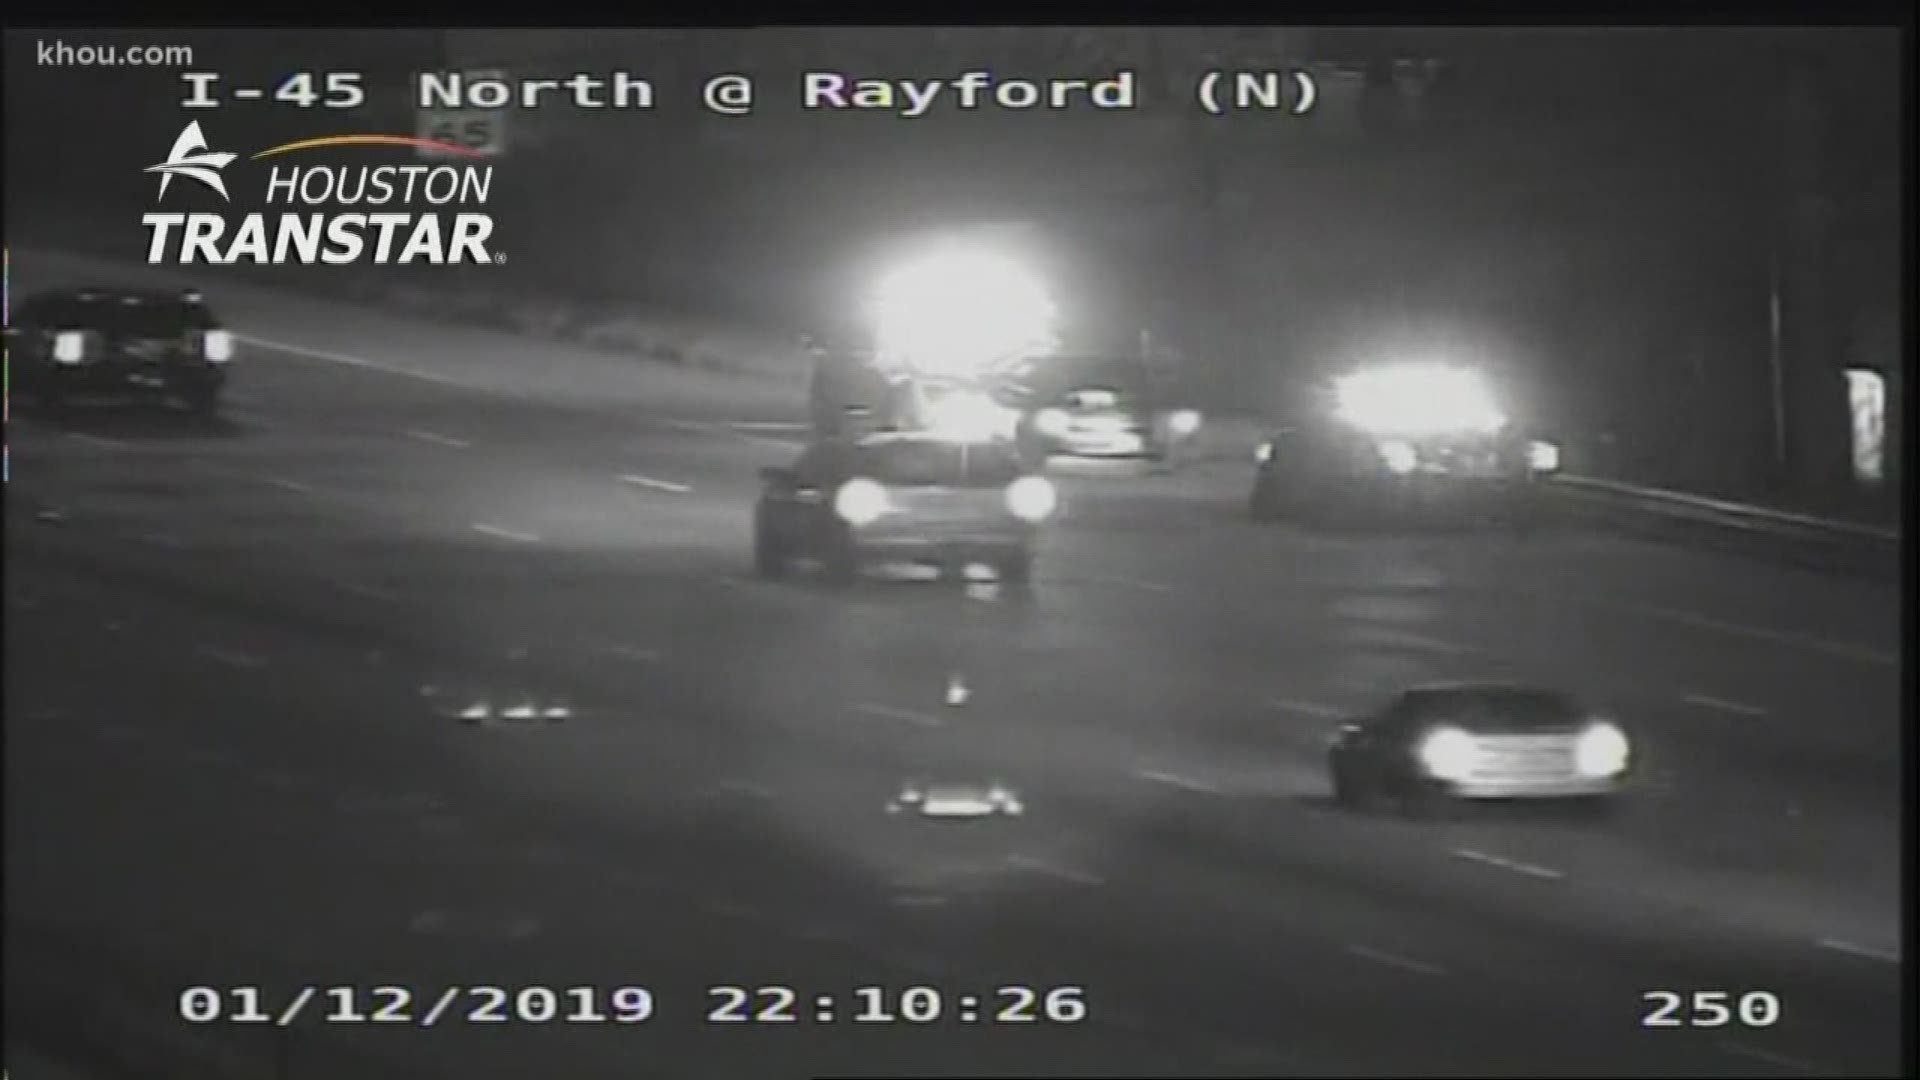 TxDOT says work wrapped up early on the I-45 northbound lanes of Rayford Sawdust. Multiple road closures led to a major inconvenience for travelers around the Houston area this weekend.